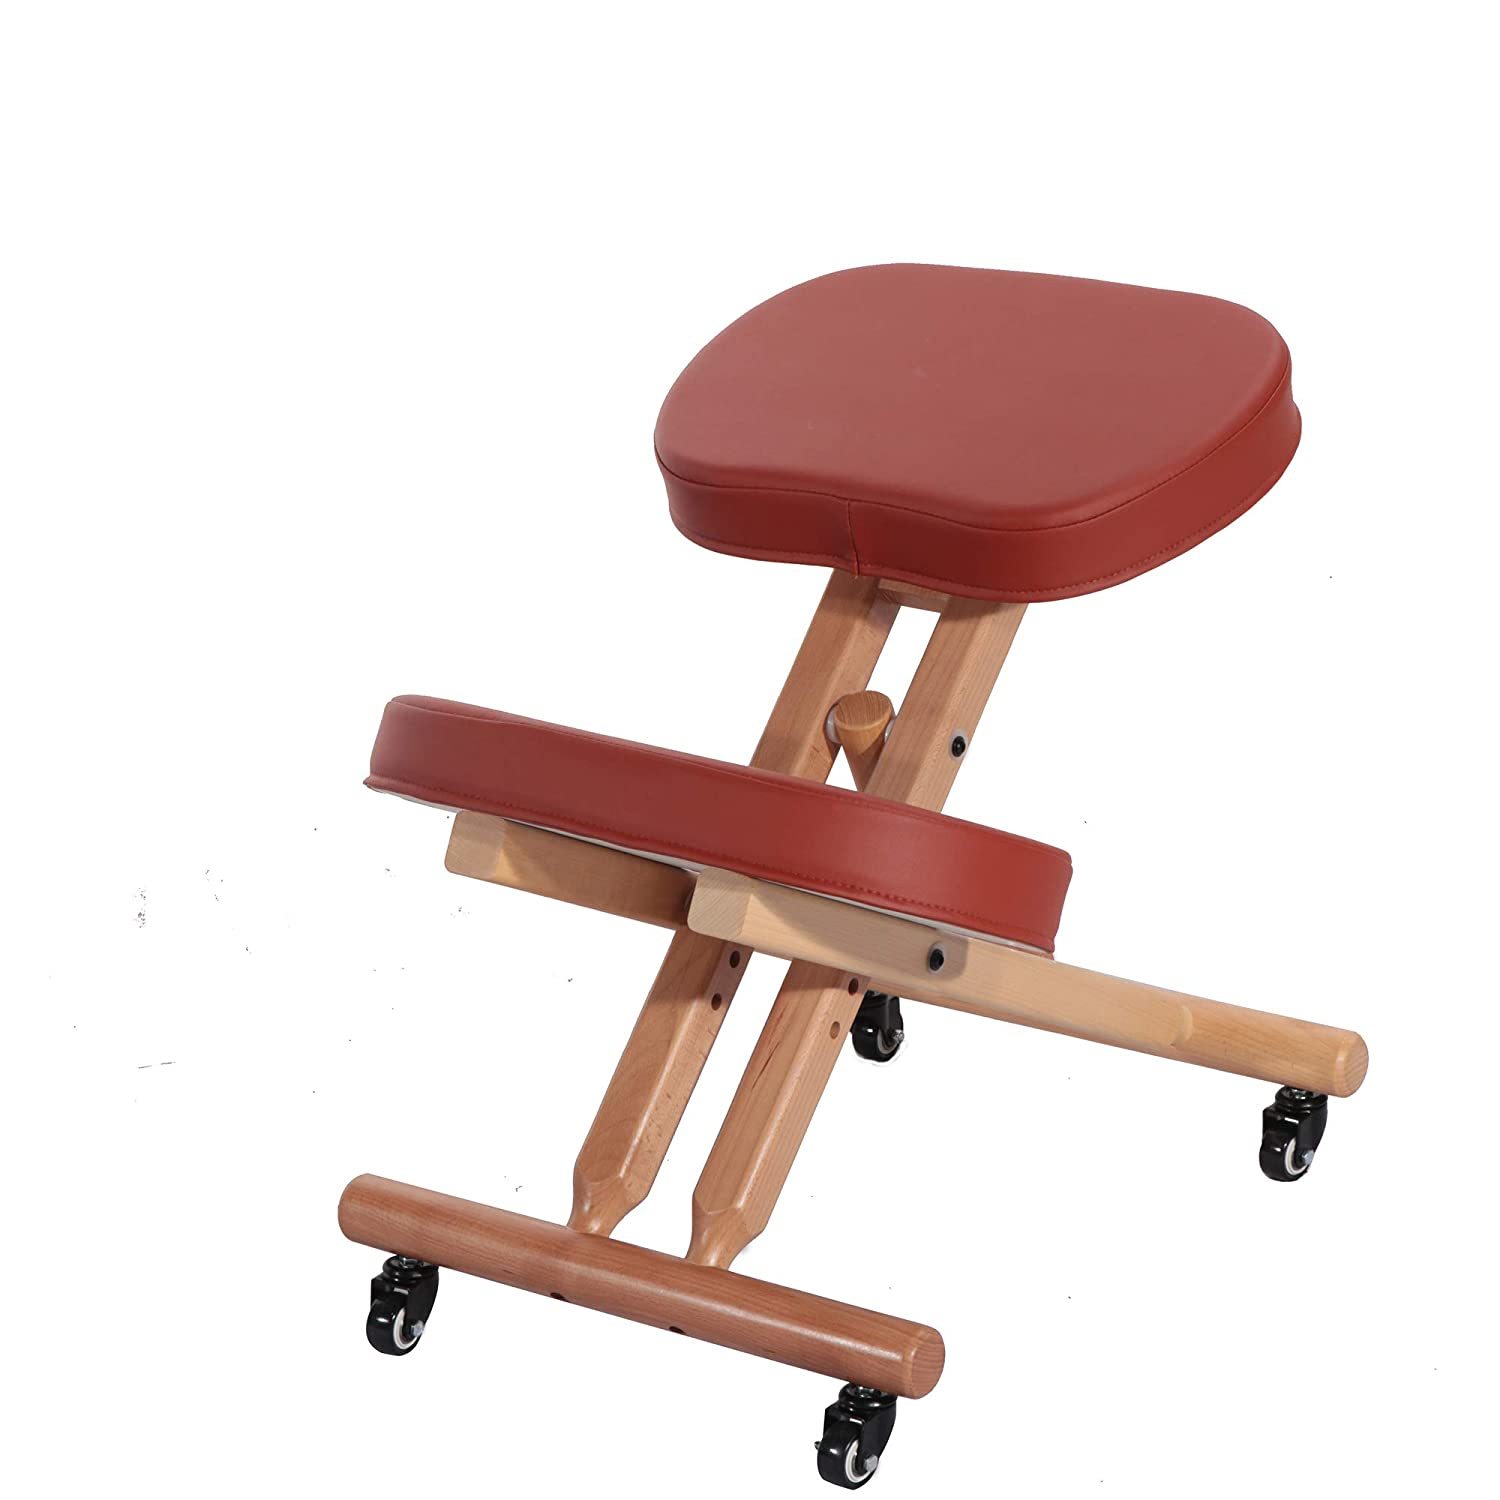 Primary image for Master Massage Comfort Plus Wooden Kneeling Chair PREFECT FOR Home,, Cinnamon